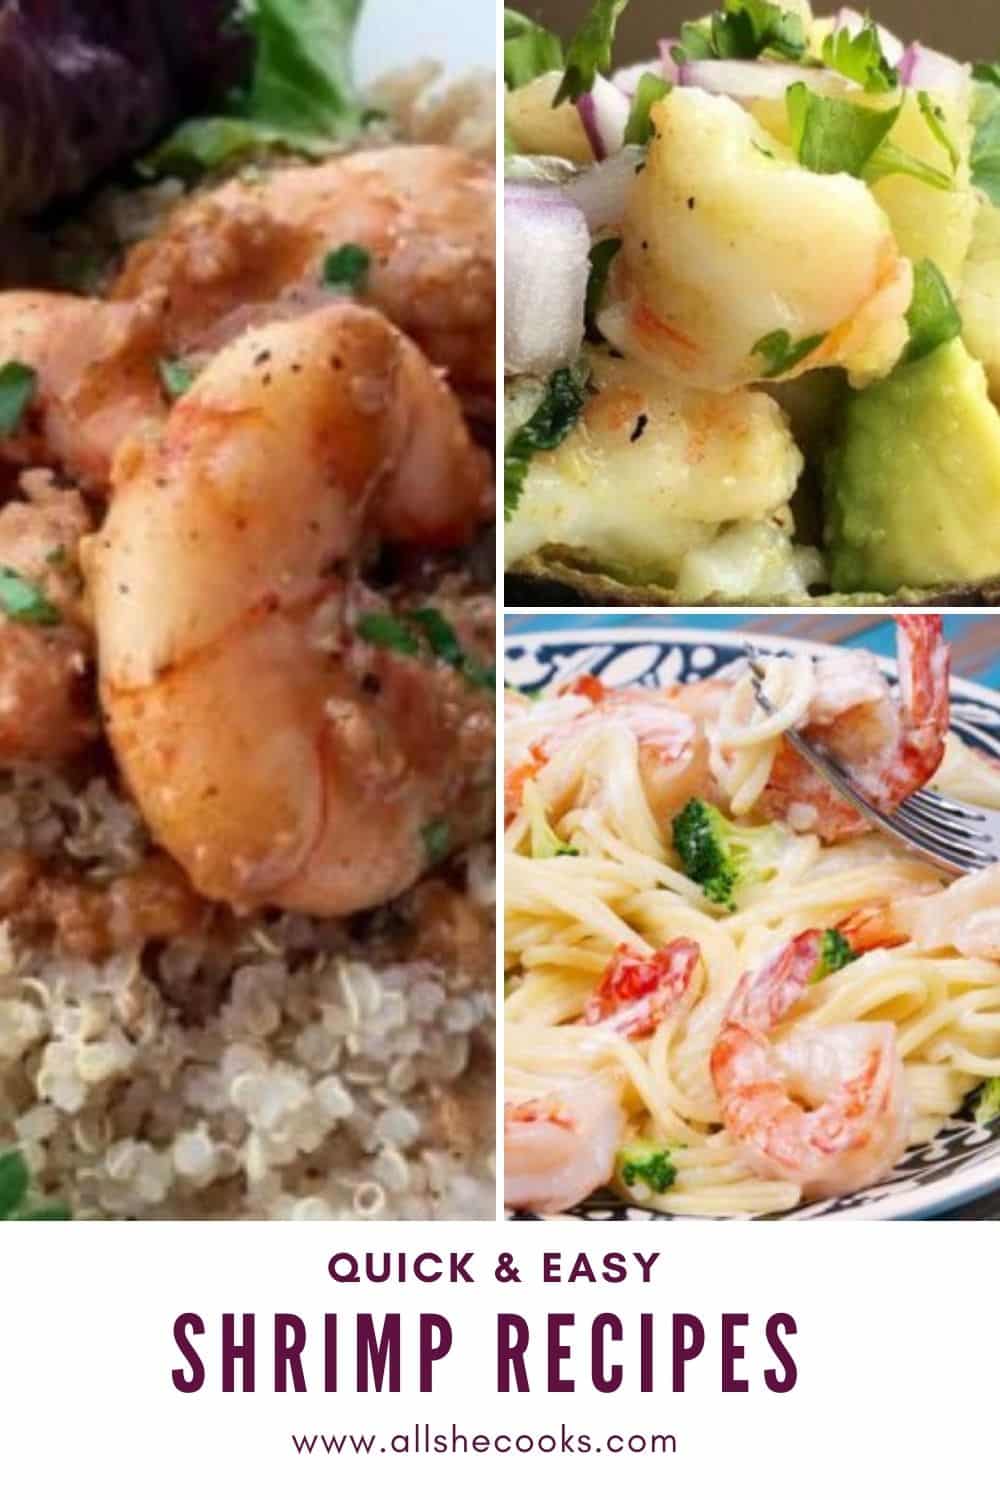 Easy Shrimp Recipes You’ll Want To Try - All She Cooks